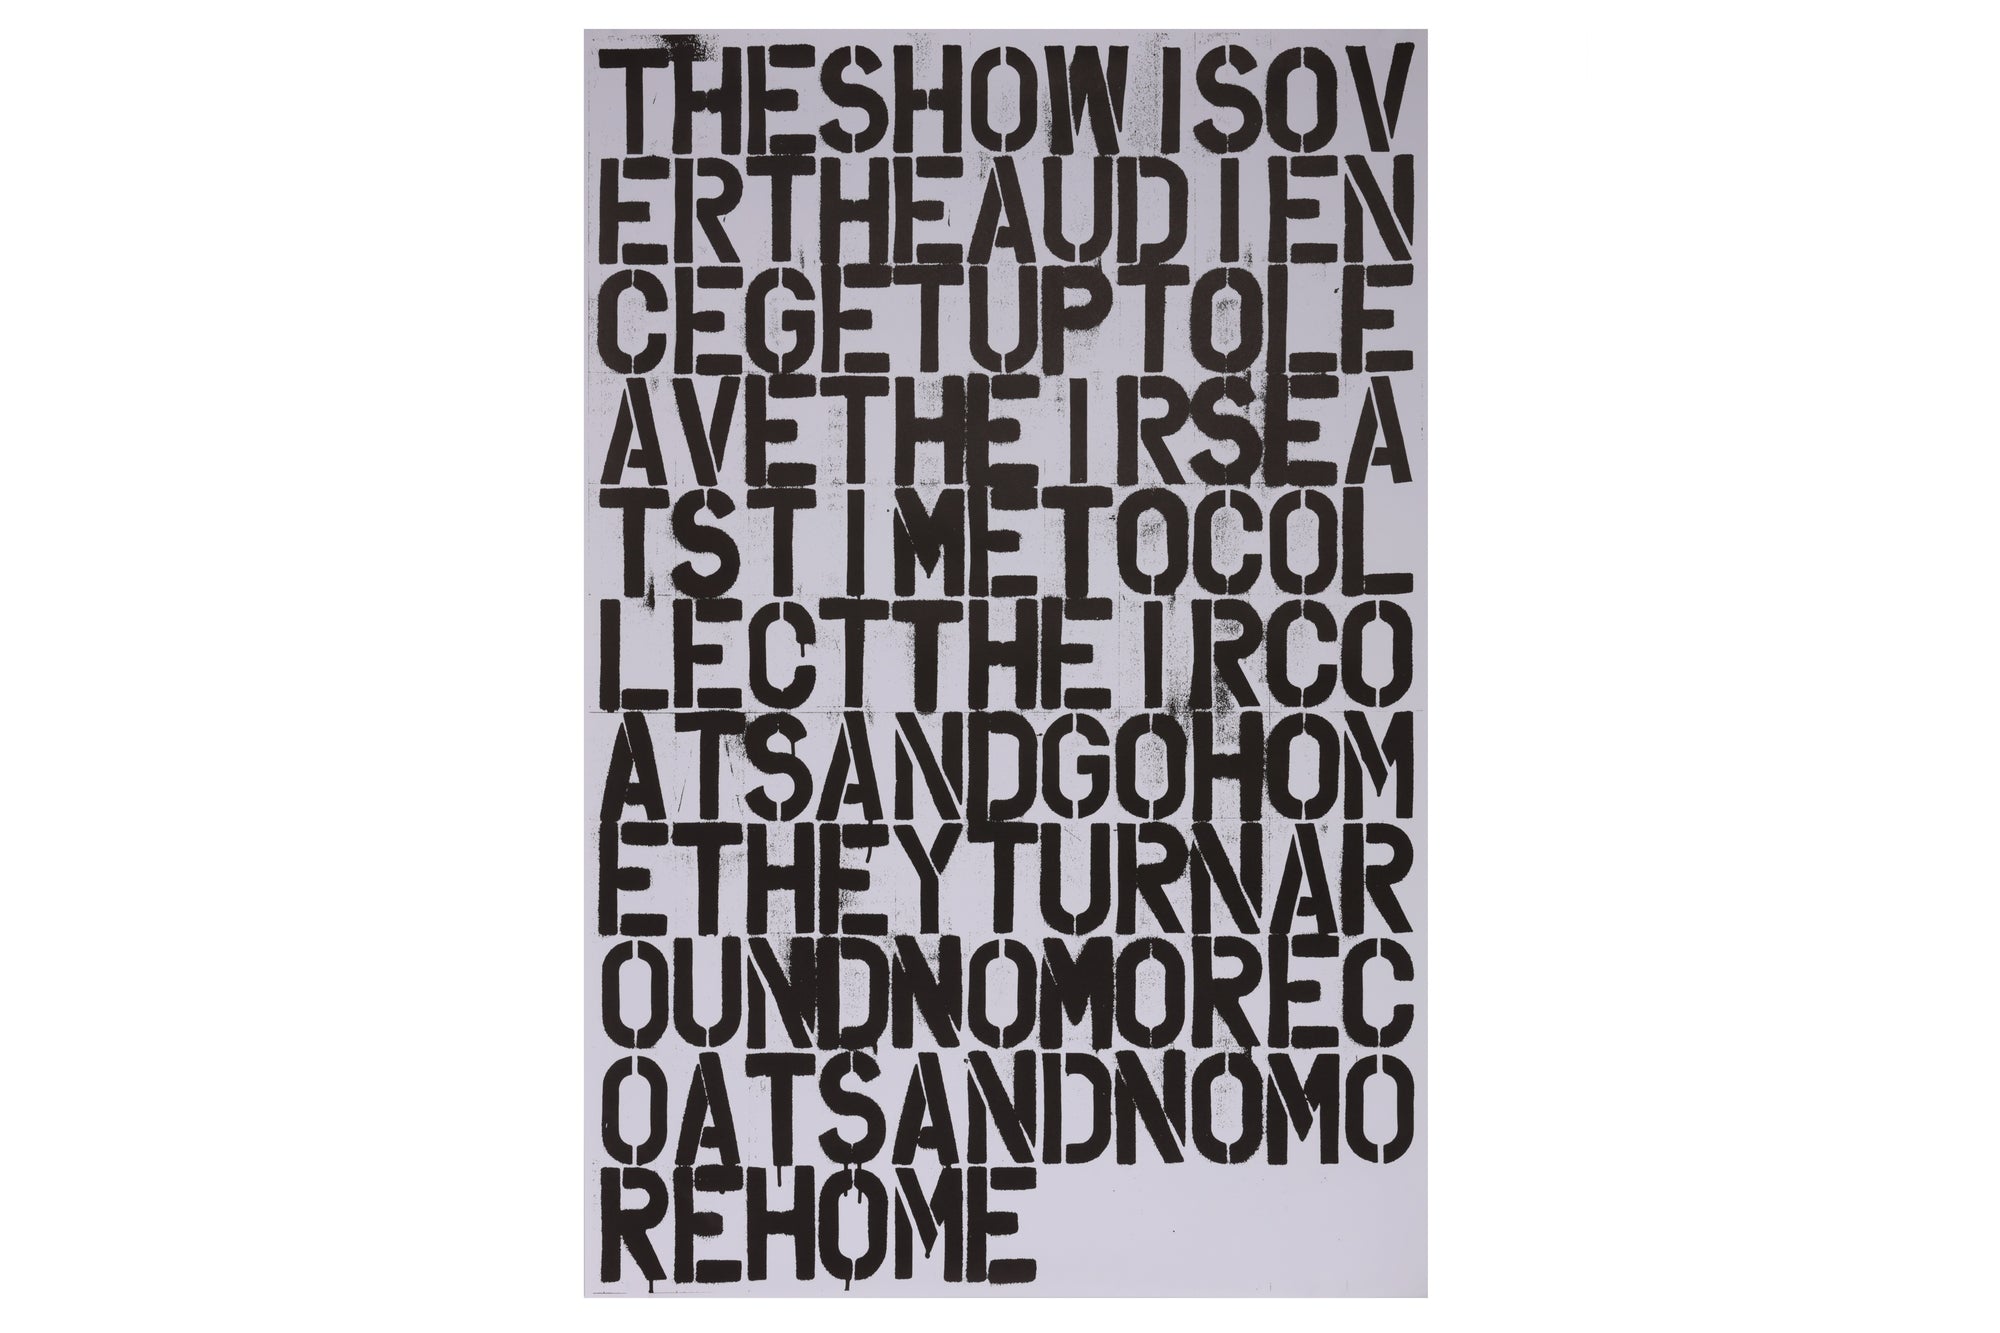 Untitled (The show is over)